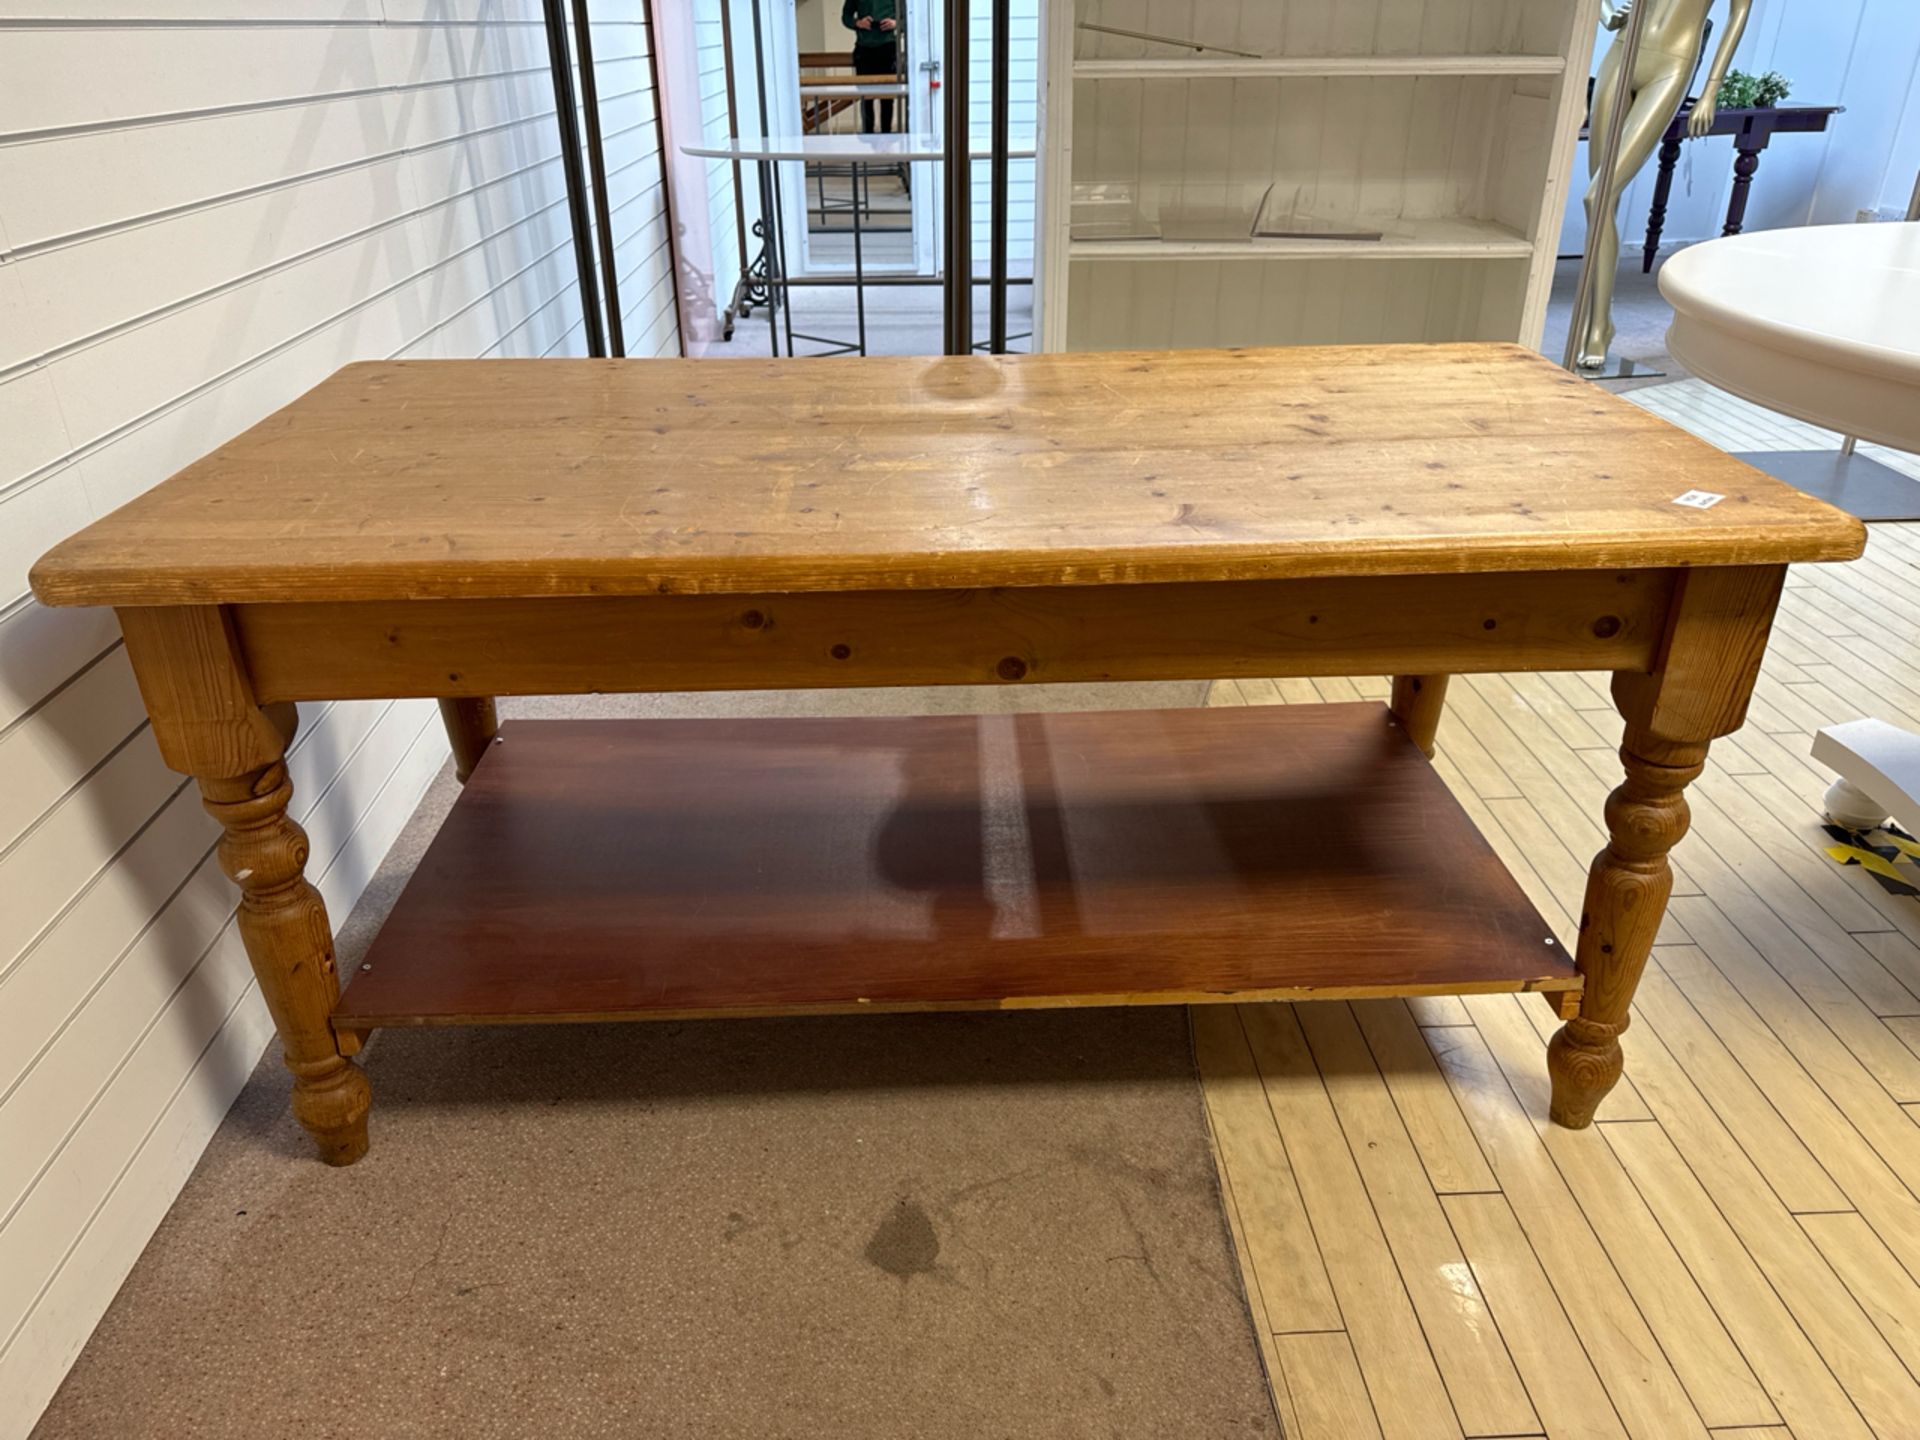 Wooden Table With Shelf